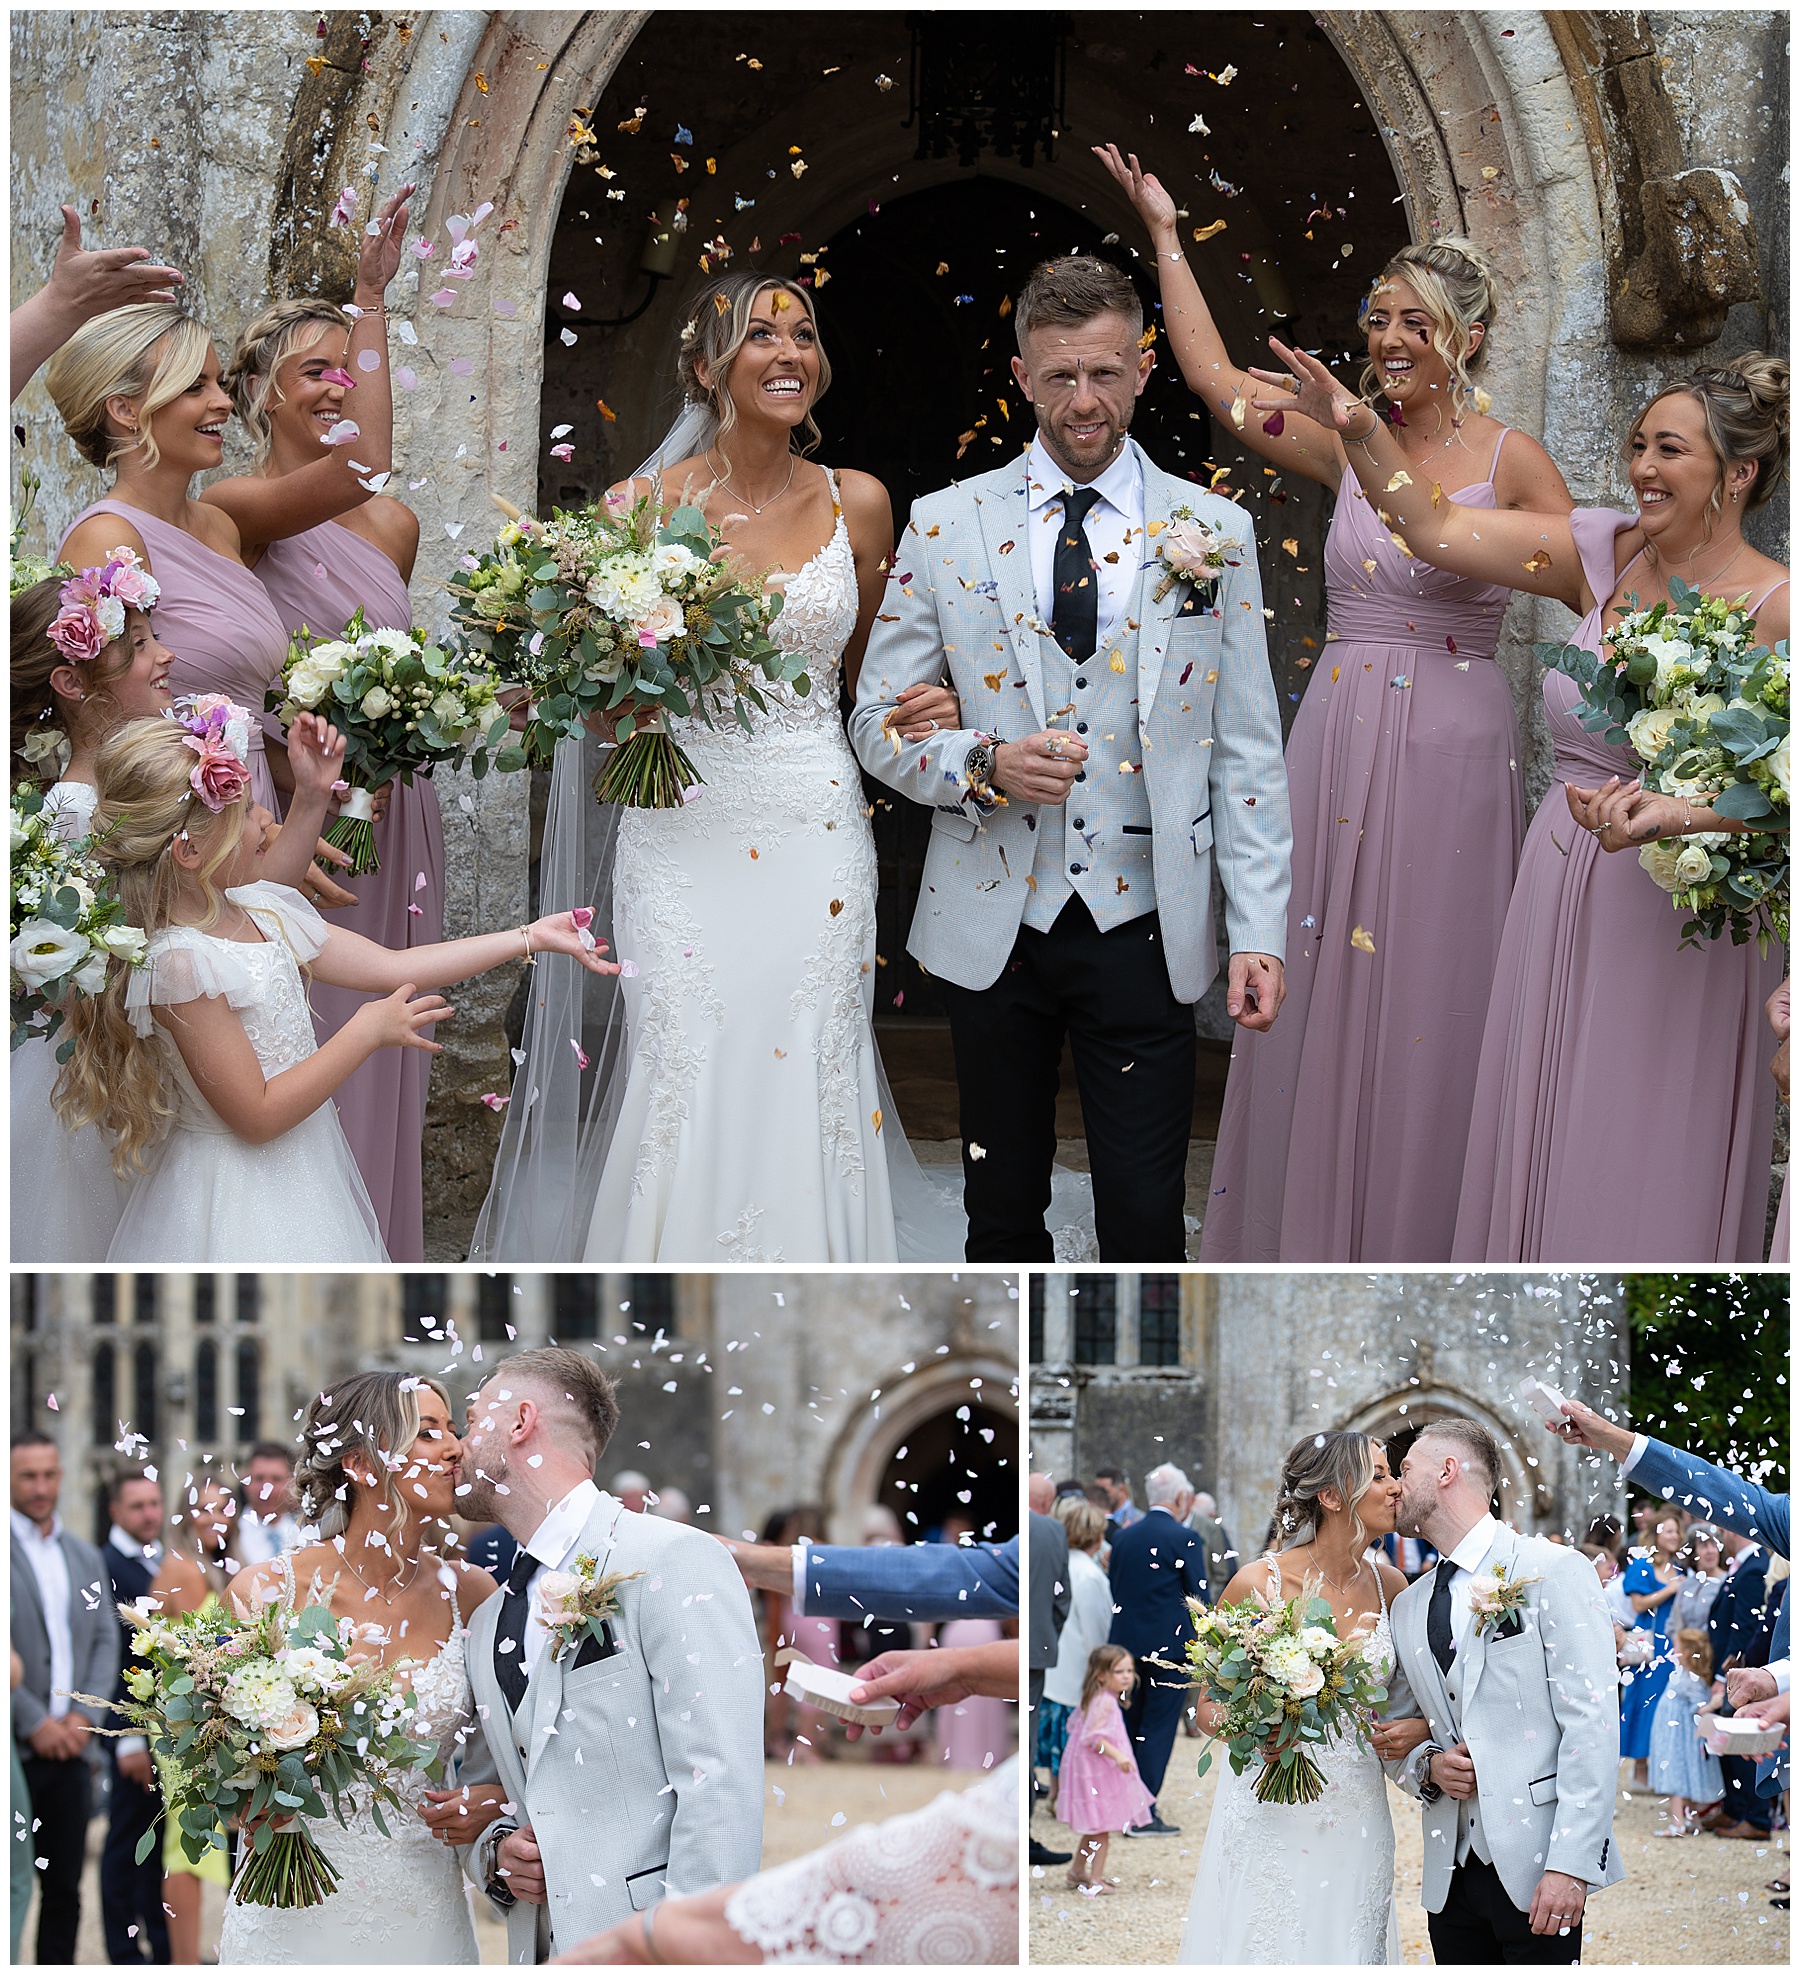 Confetti is thrown over bride and groom at Athelhampton House